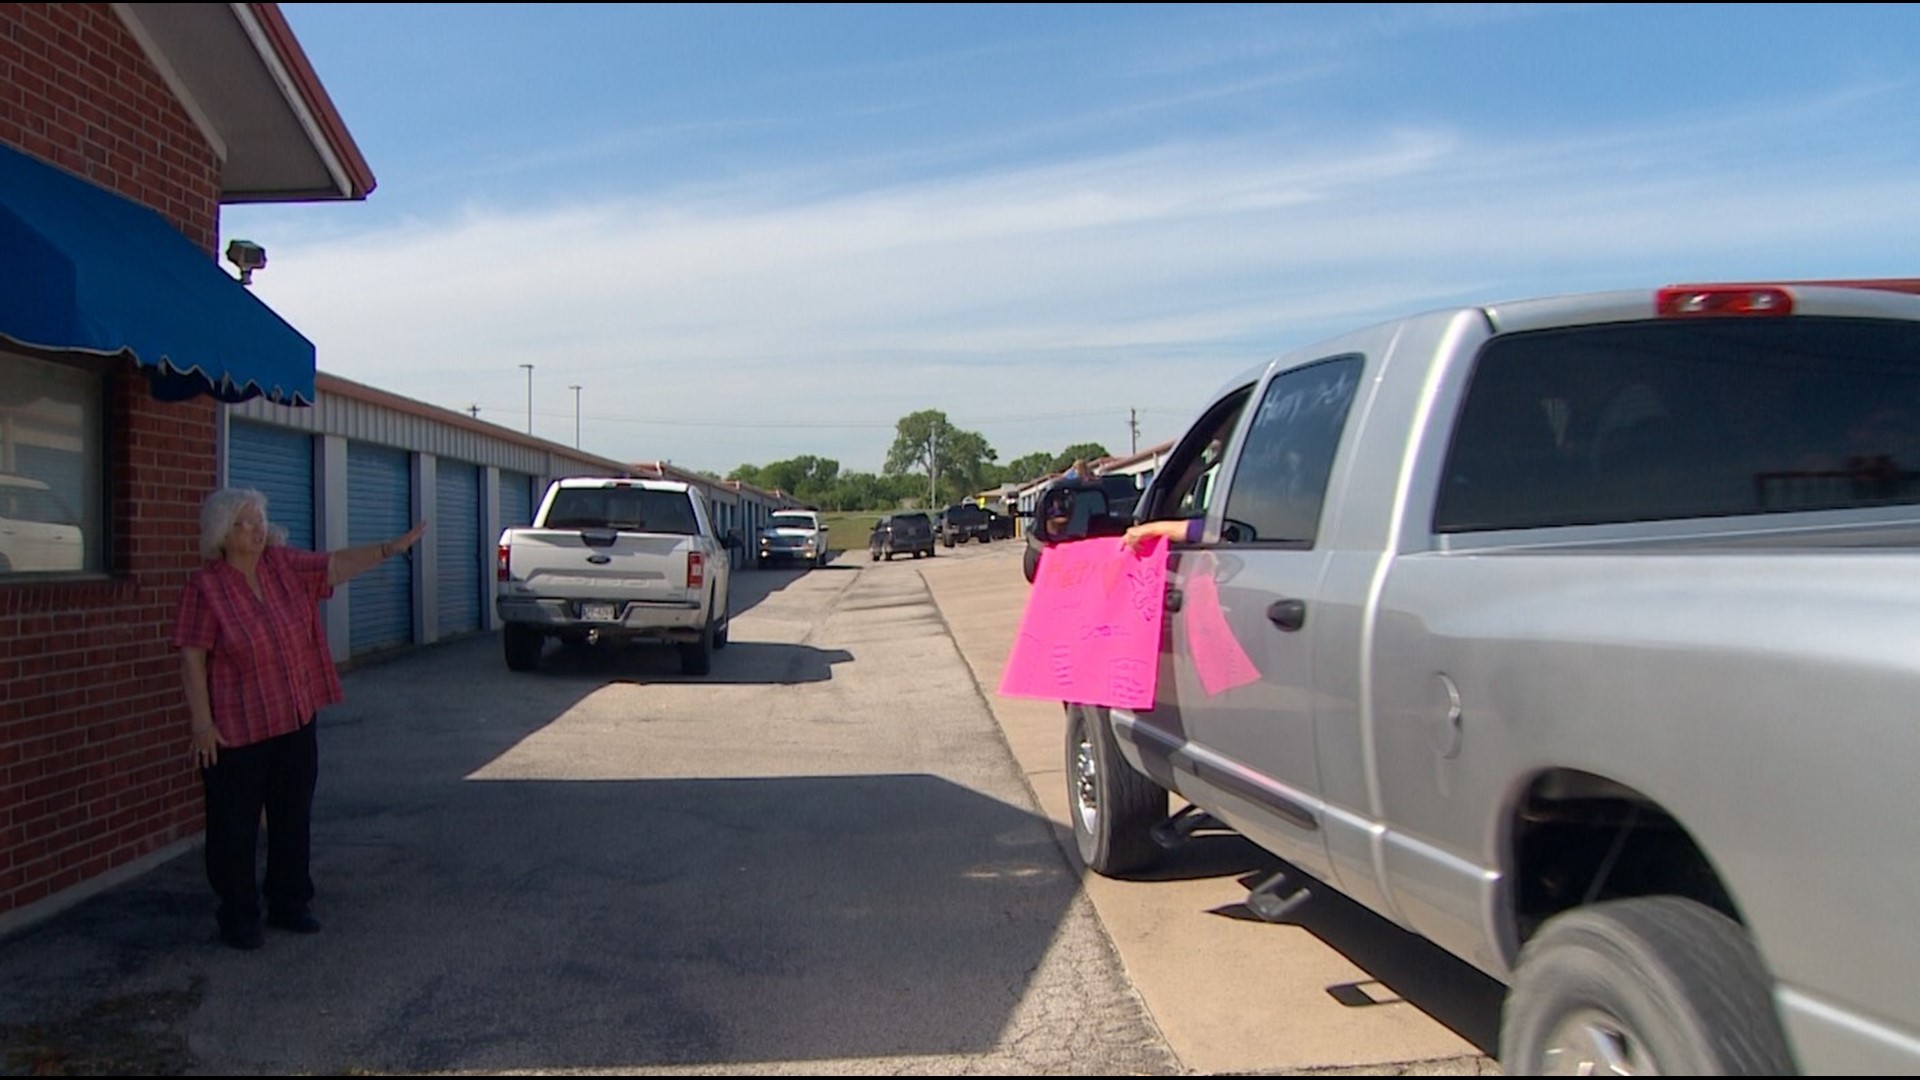 A Parker County family surprised one of its most loved members this week, as they held a drive-by parade for 83-year-old Bonnie Smethers.